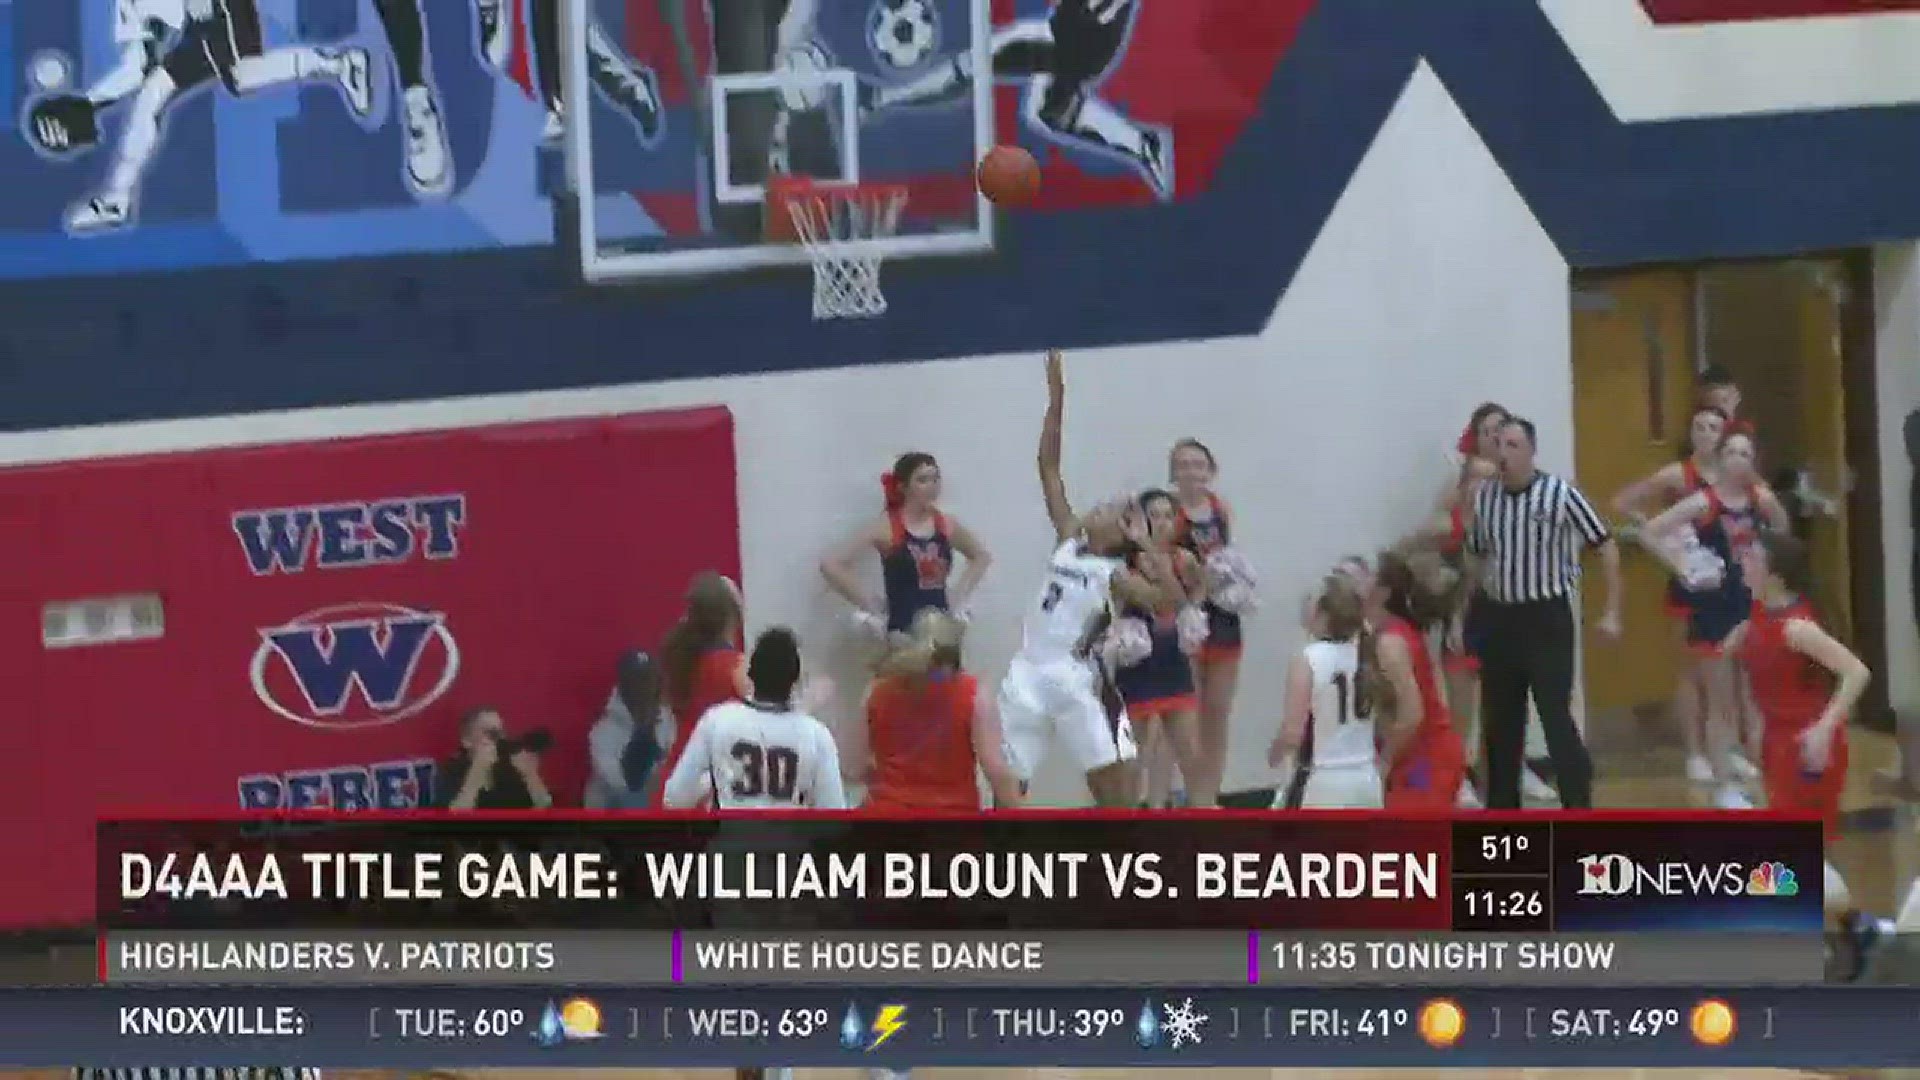 Bearden took down William Blount, 58-53 in the District 3-AAA tournament championship game.